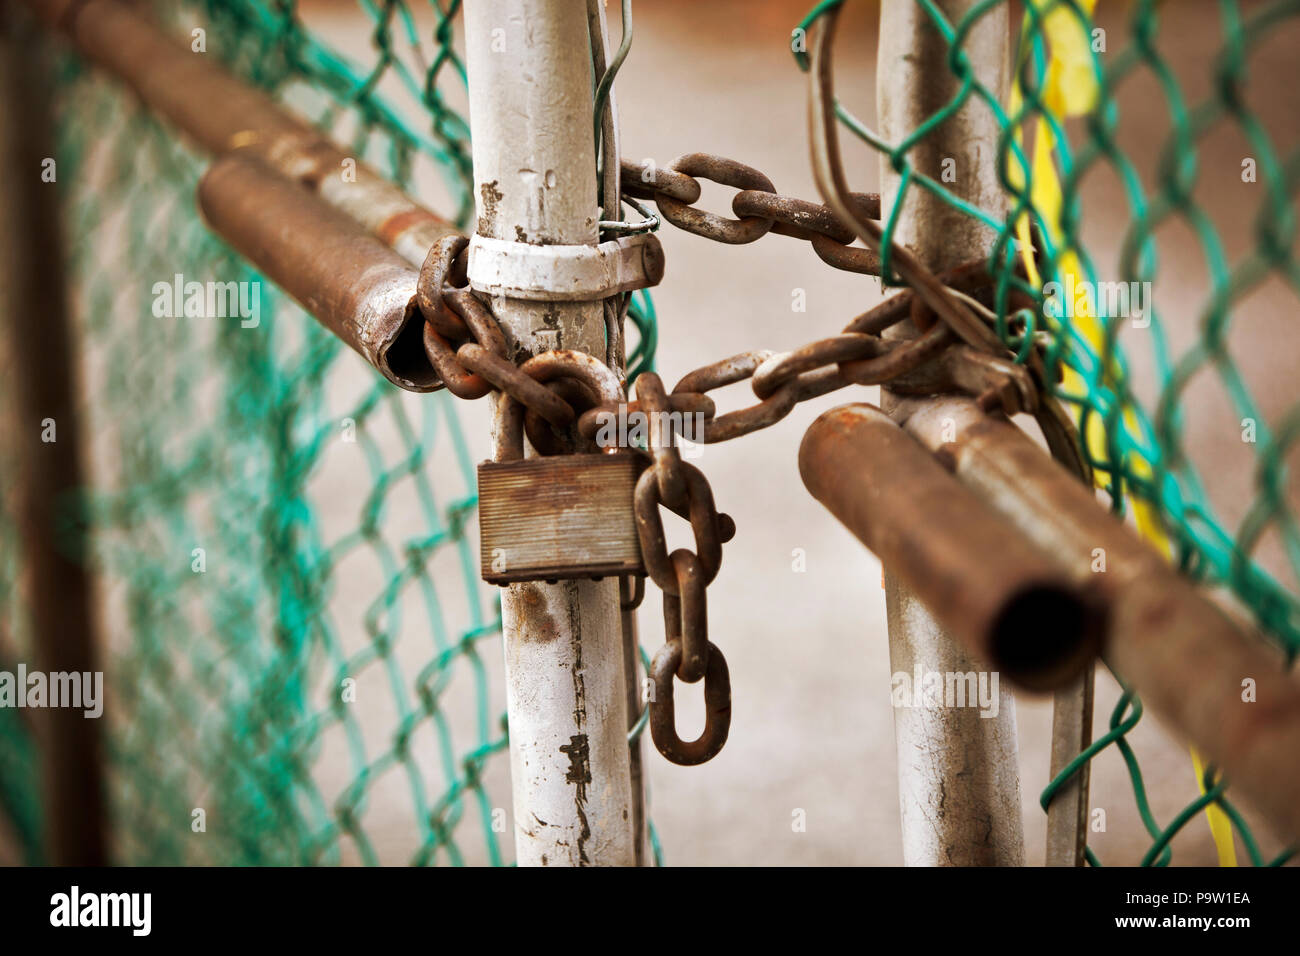 Gate lock with Rusty lock and chain Stock Photo